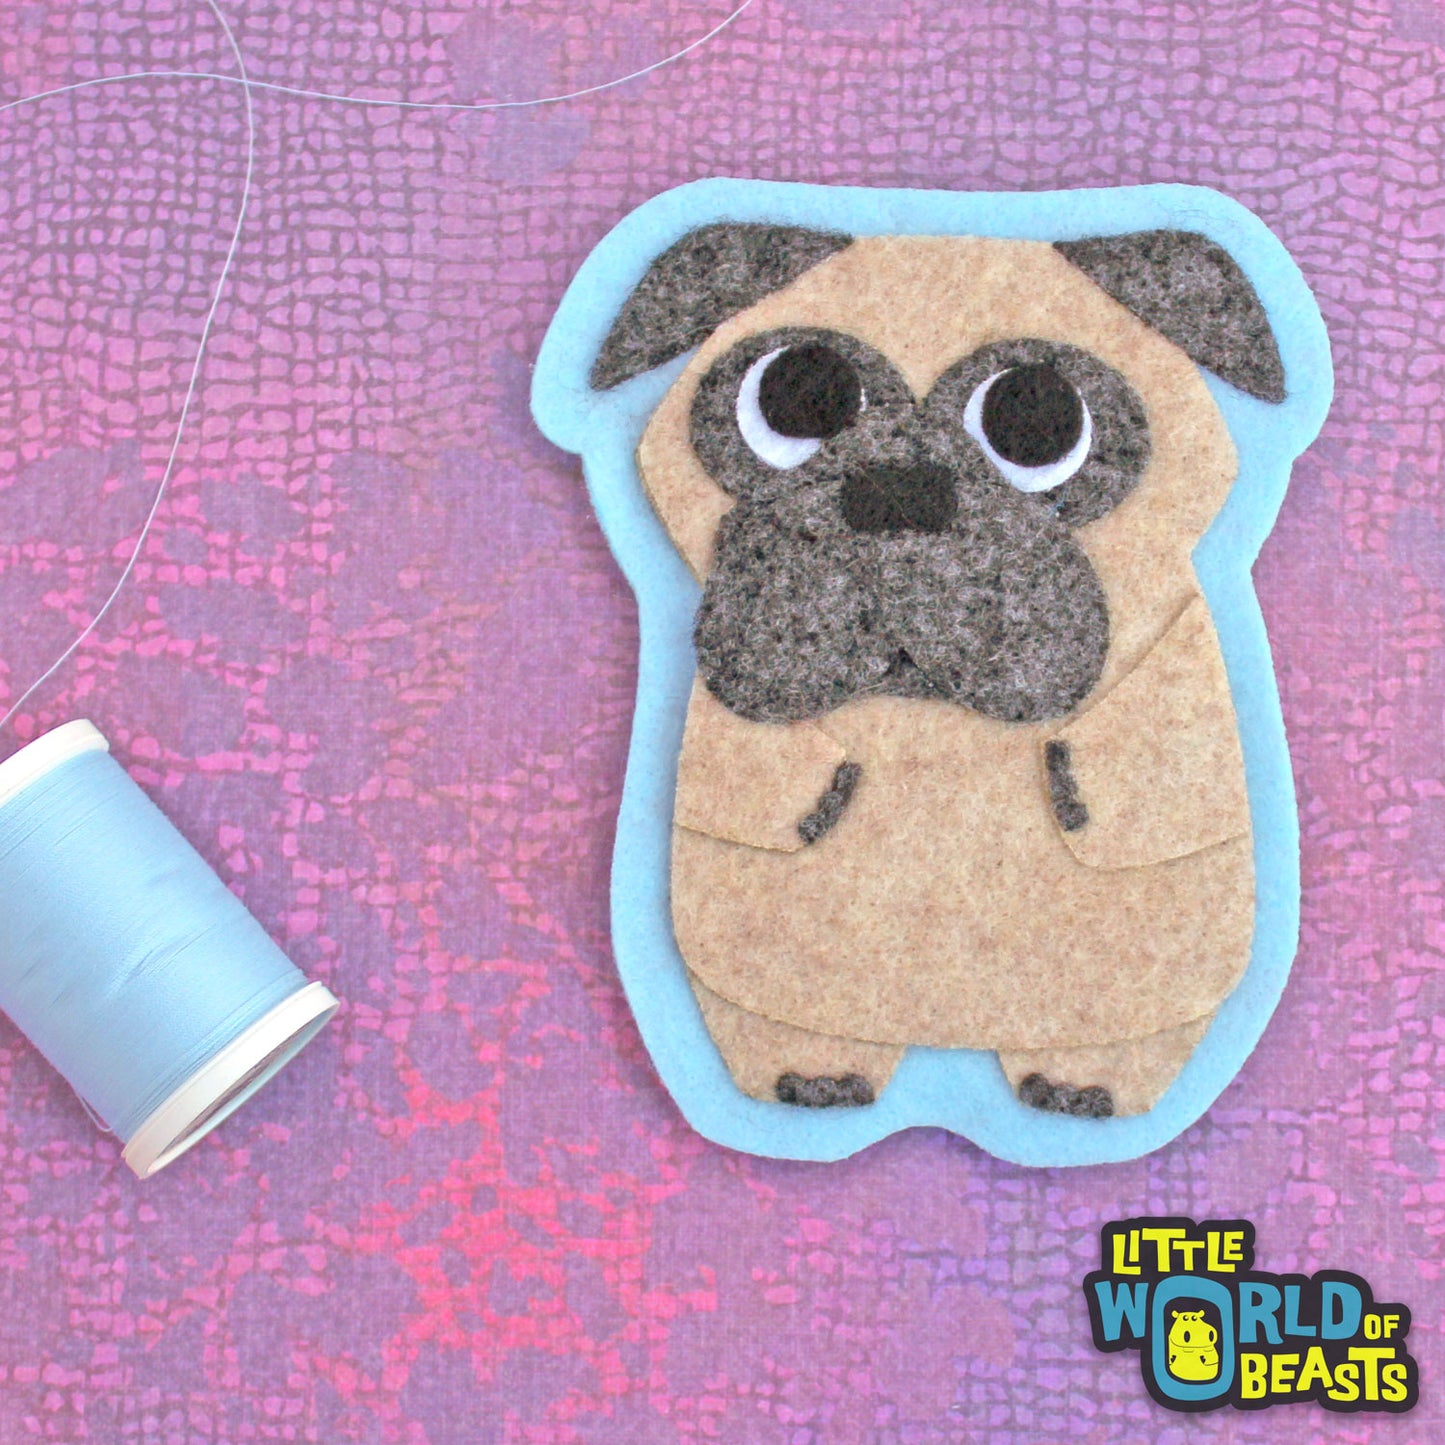 Peaches the Pug - Felt Dog Sew On Patch - Little World of Beasts